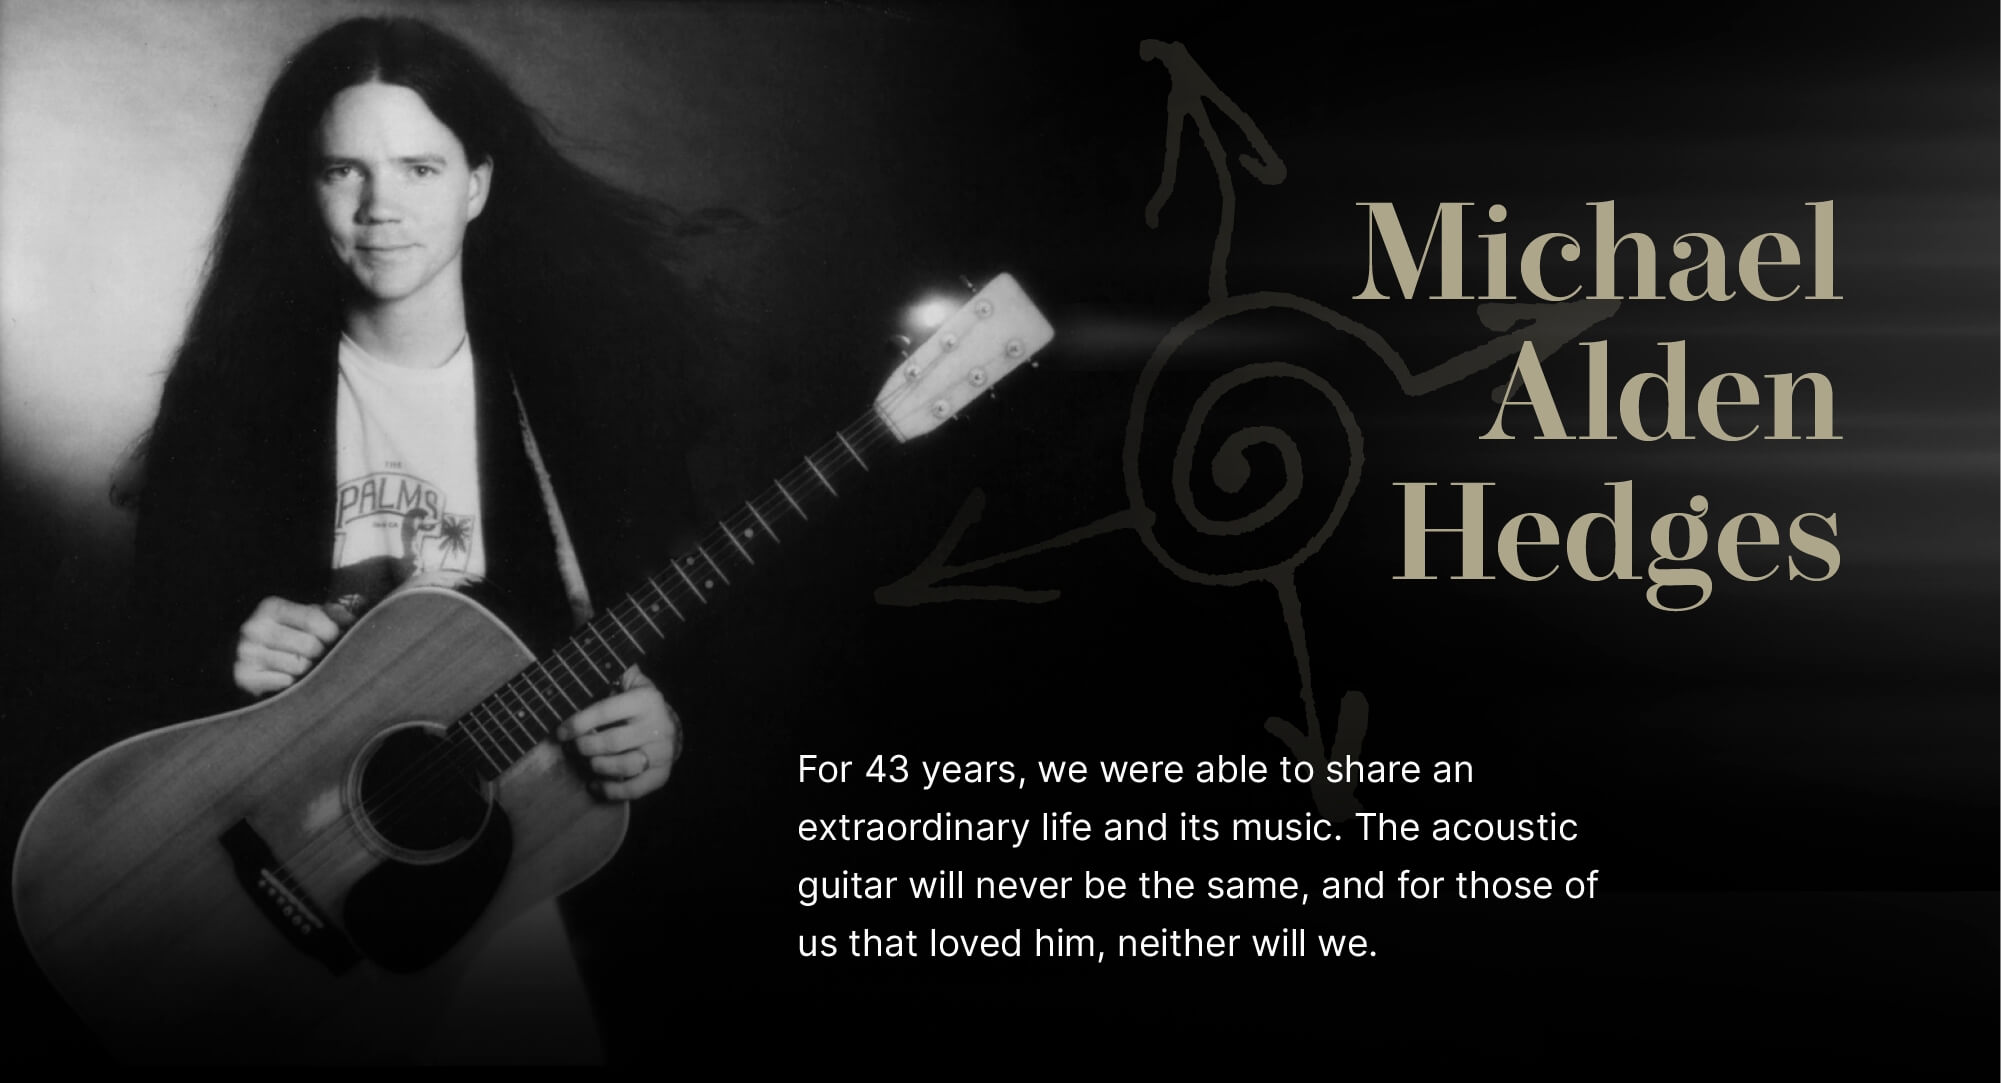 Michael Alden Hedges. For 43 years, we were able to share an extraordinary life and its music. The acoustic guitar will never be the same, and for those of us that loved him, neither will we.